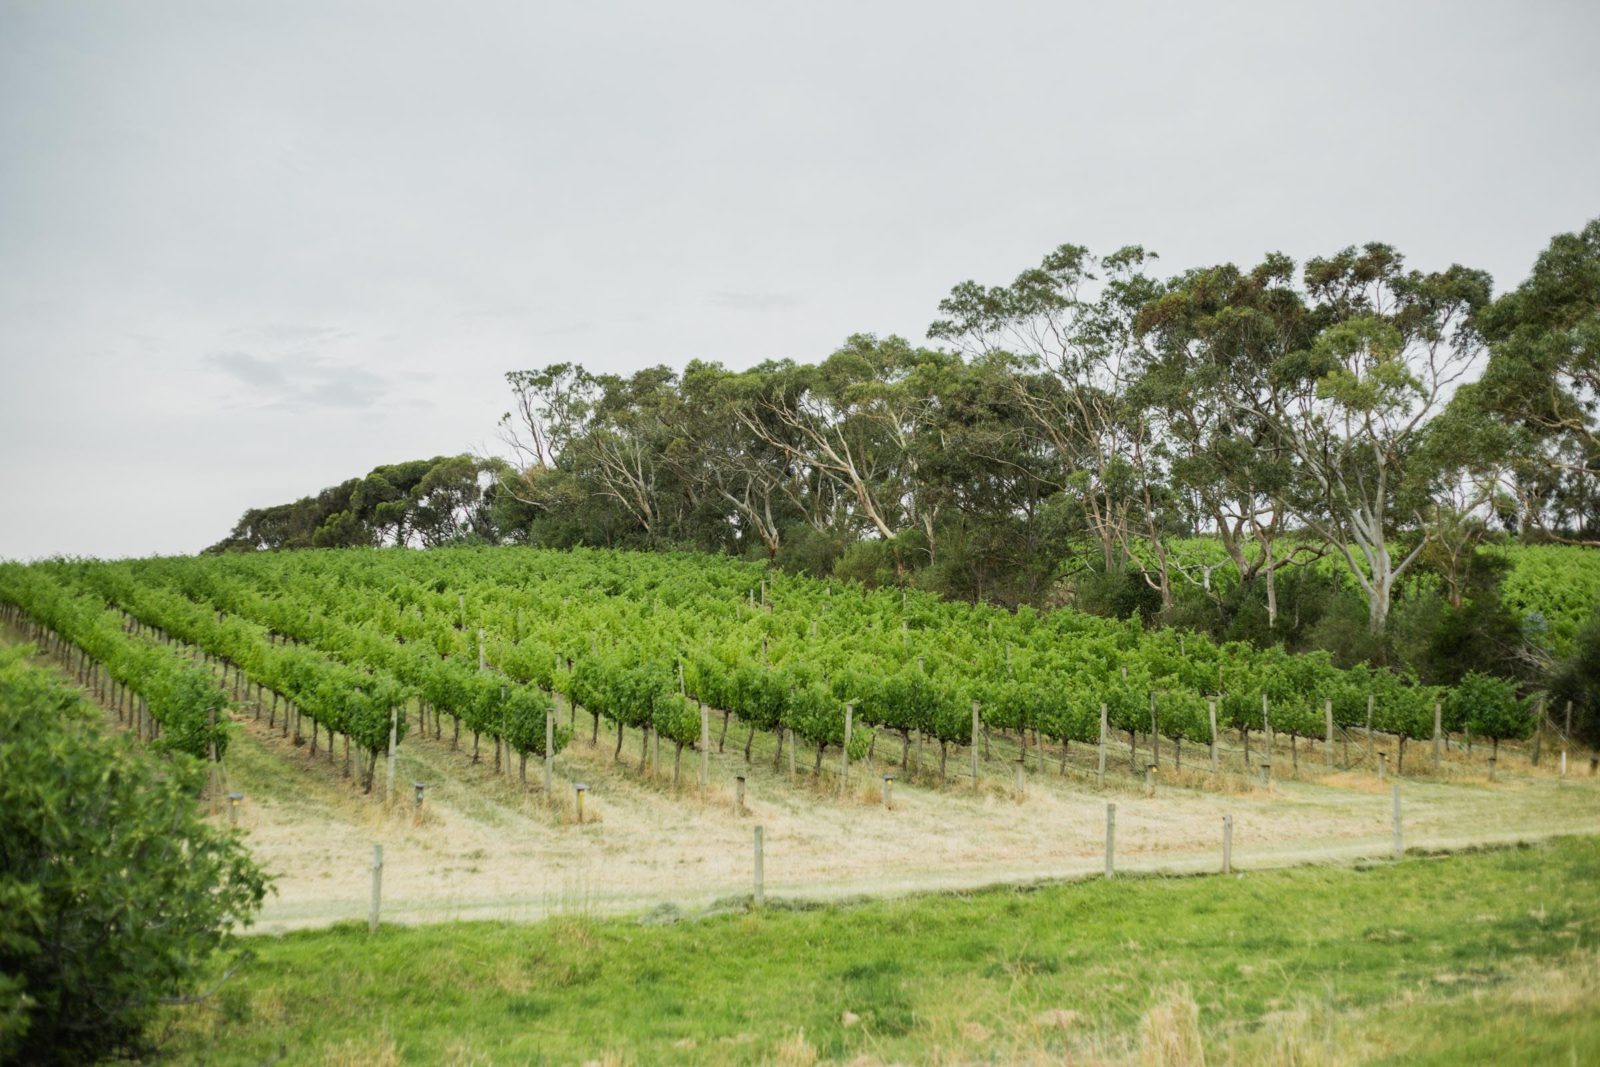 View of lush rows of grape vines on a hill with gum trees in the background